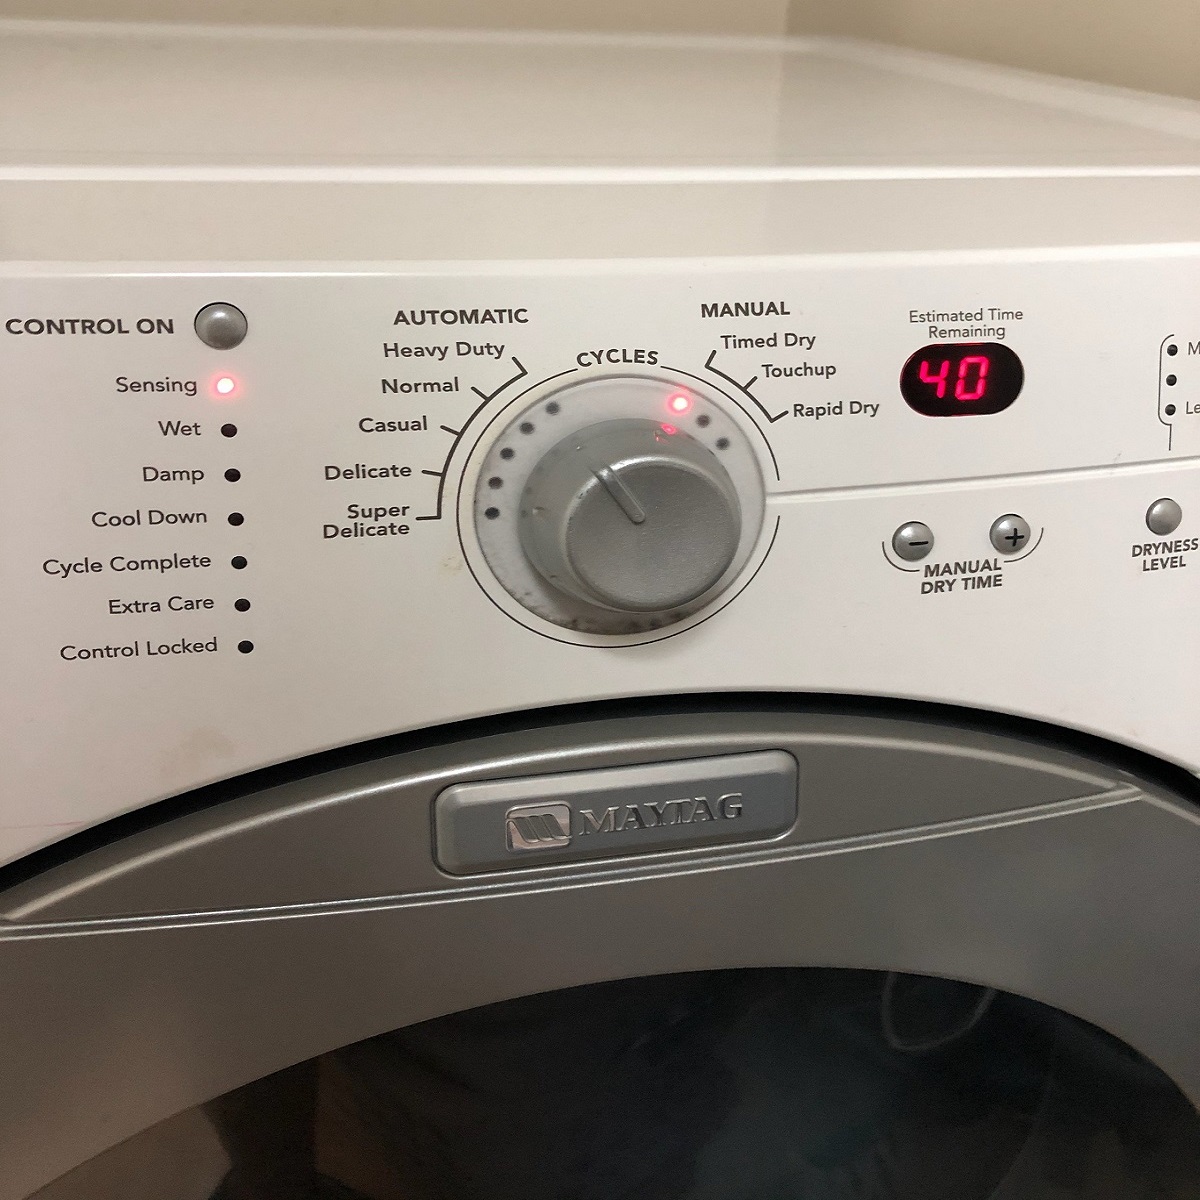 Why Is My Maytag Washer Stuck On Sensing